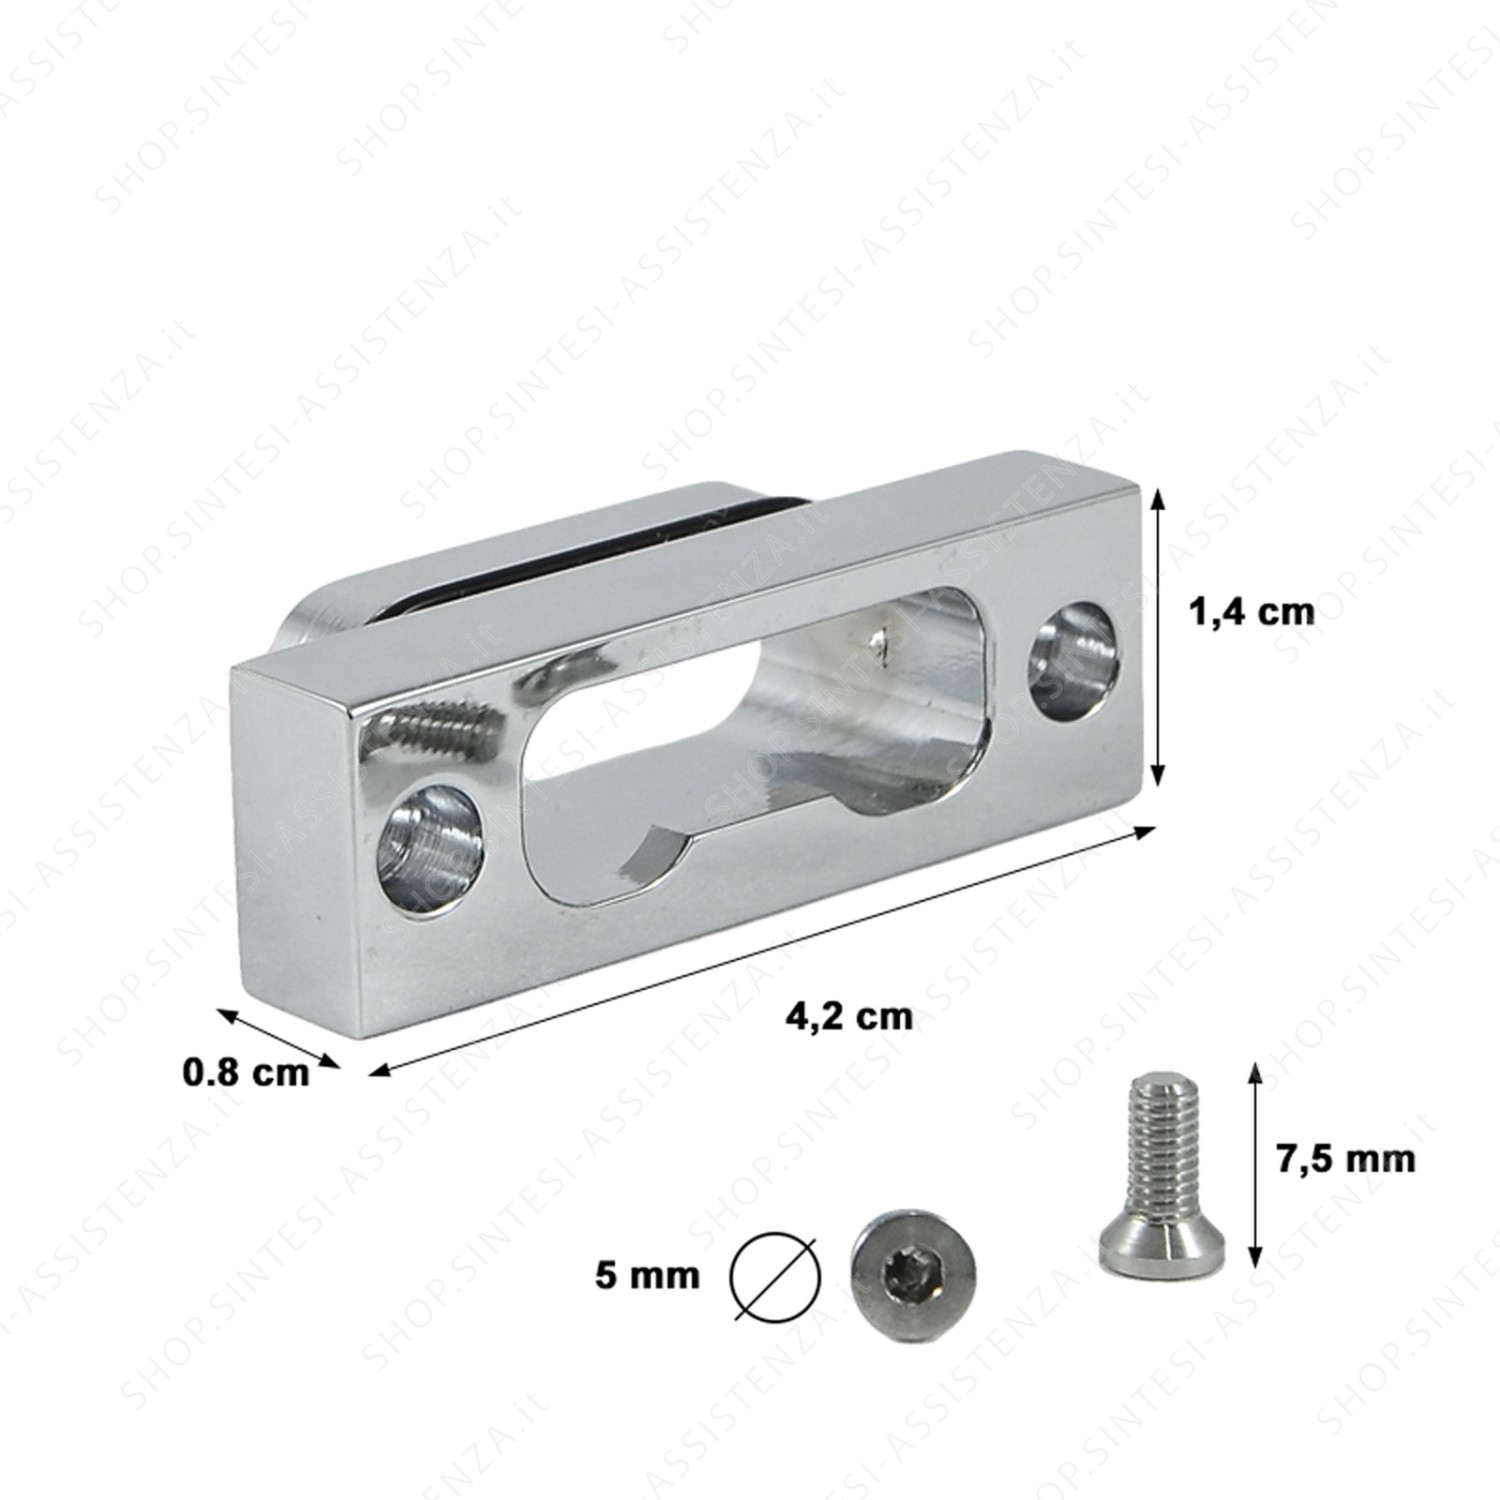 CHROME BLOCK FOR AERATOR WITH GASKET FRANKE QUANTUM TAPS - 133.0363.125